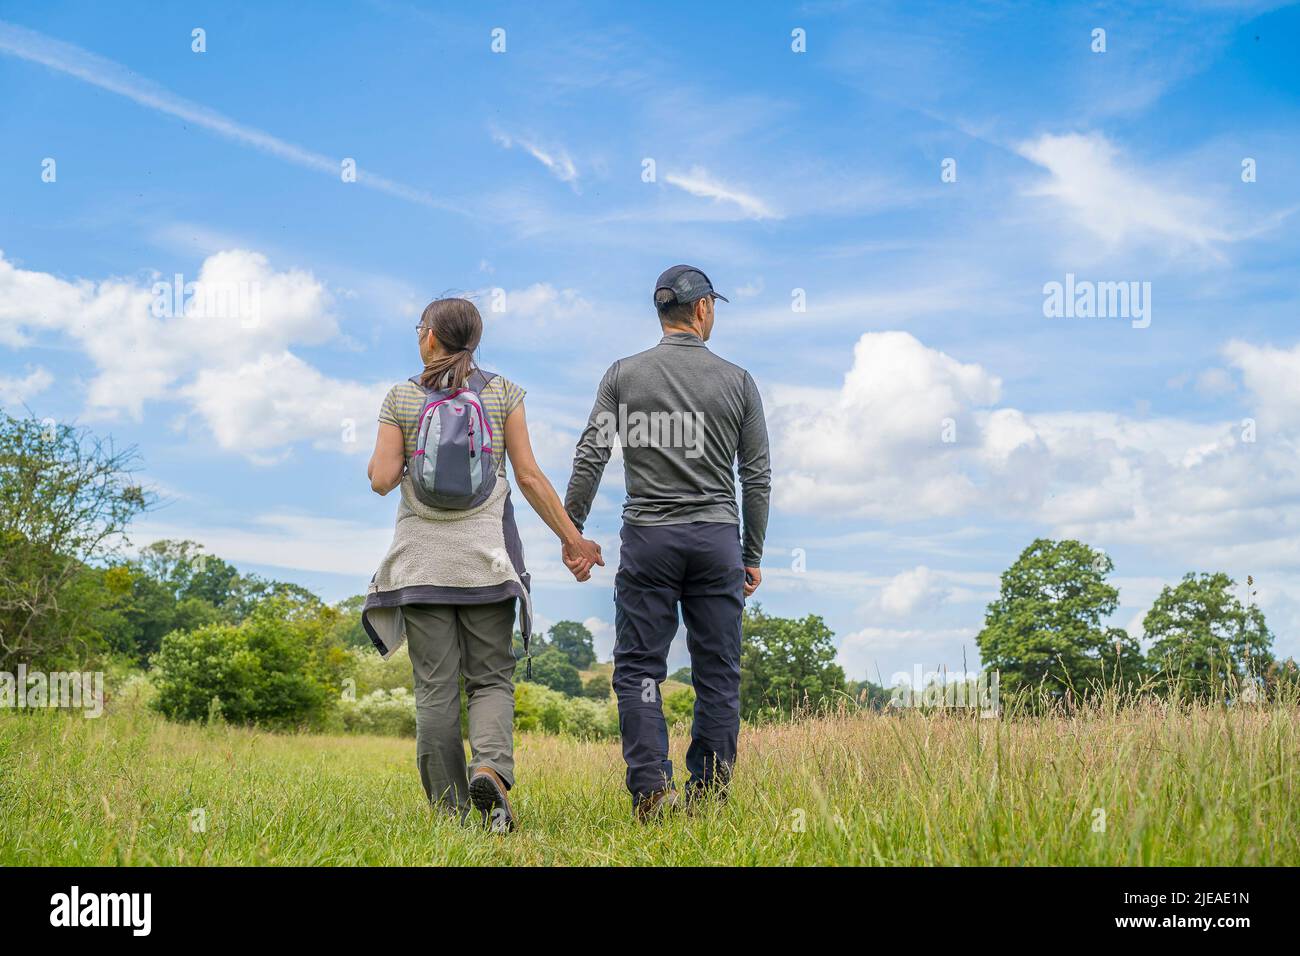 Kidderminster, UK. 26th June, 2022. UK weather: sunny weather and warm temperatures entice walkers for a stroll in the countryside. A couple, holding hands, enjoy a country walk through meadows admiring the natural world around them and the blue skies above. Credit: Lee Hudson/Alamy Live News Stock Photo